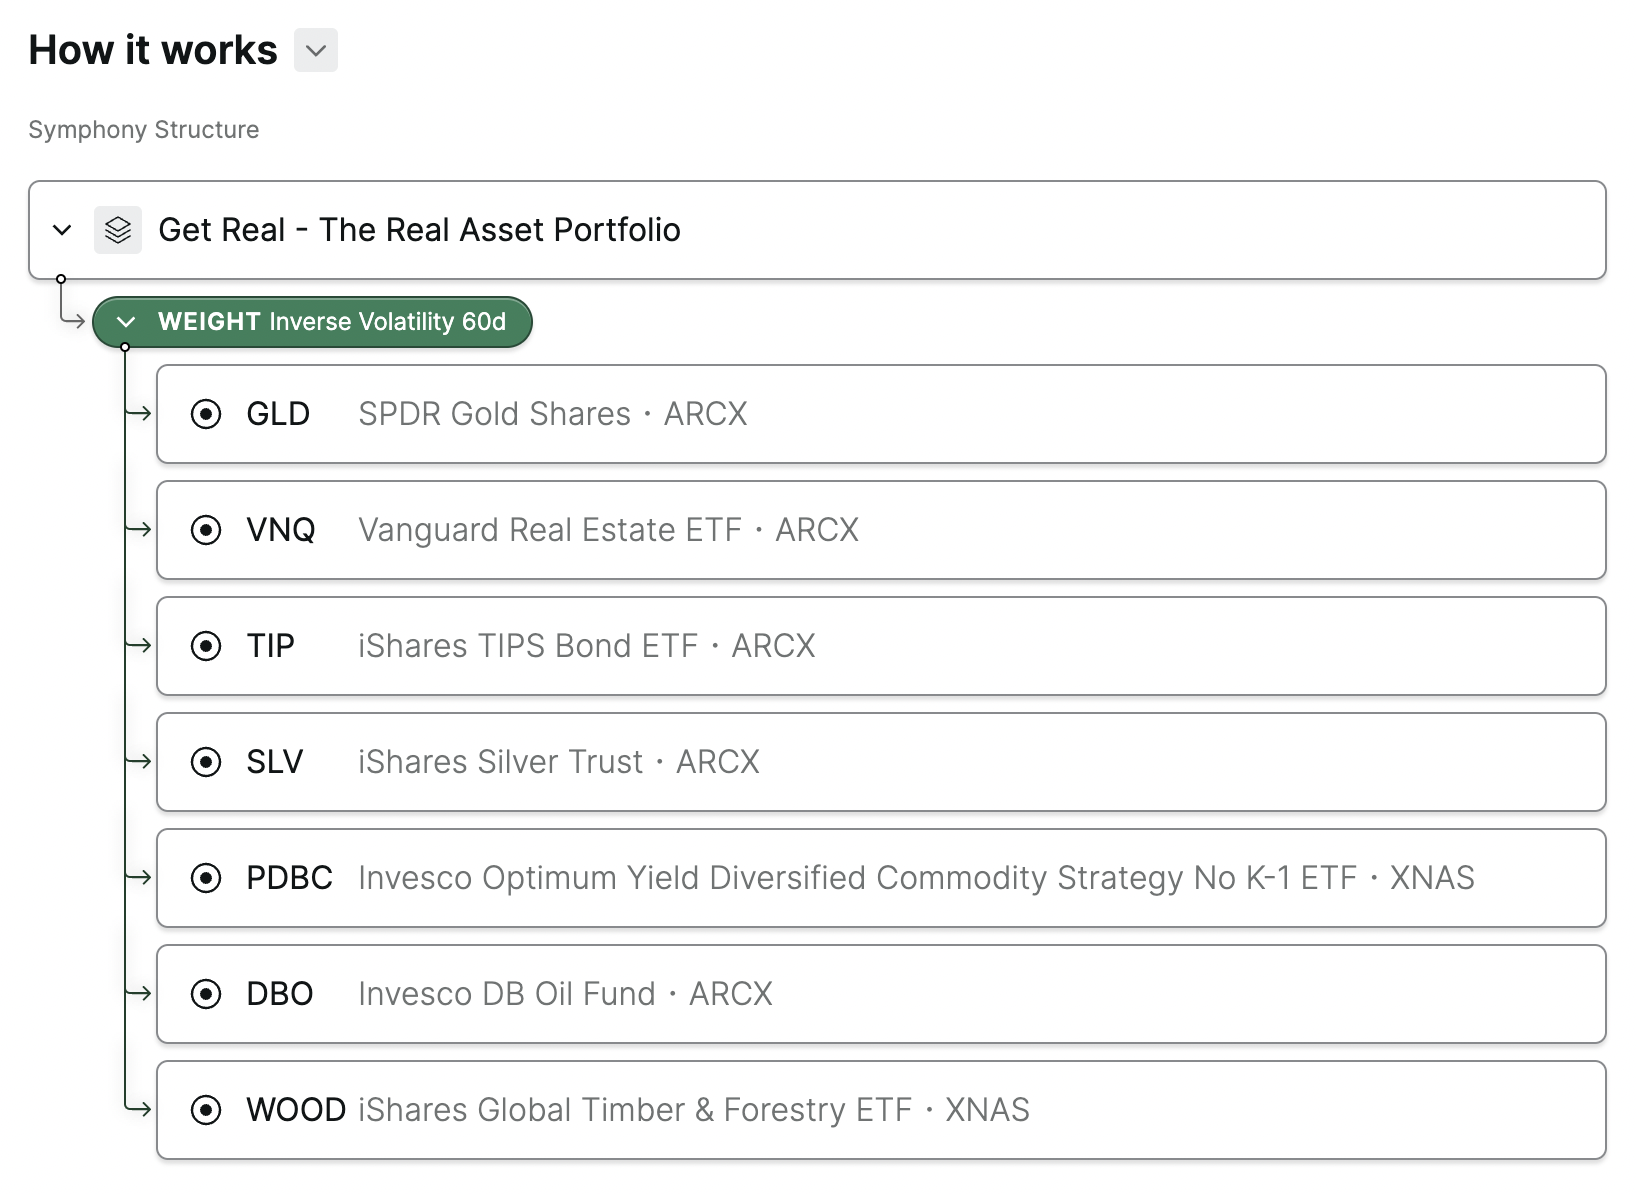 The real asset portfolio on Composer combines TIPs, REITs, and commodity ETFs. 